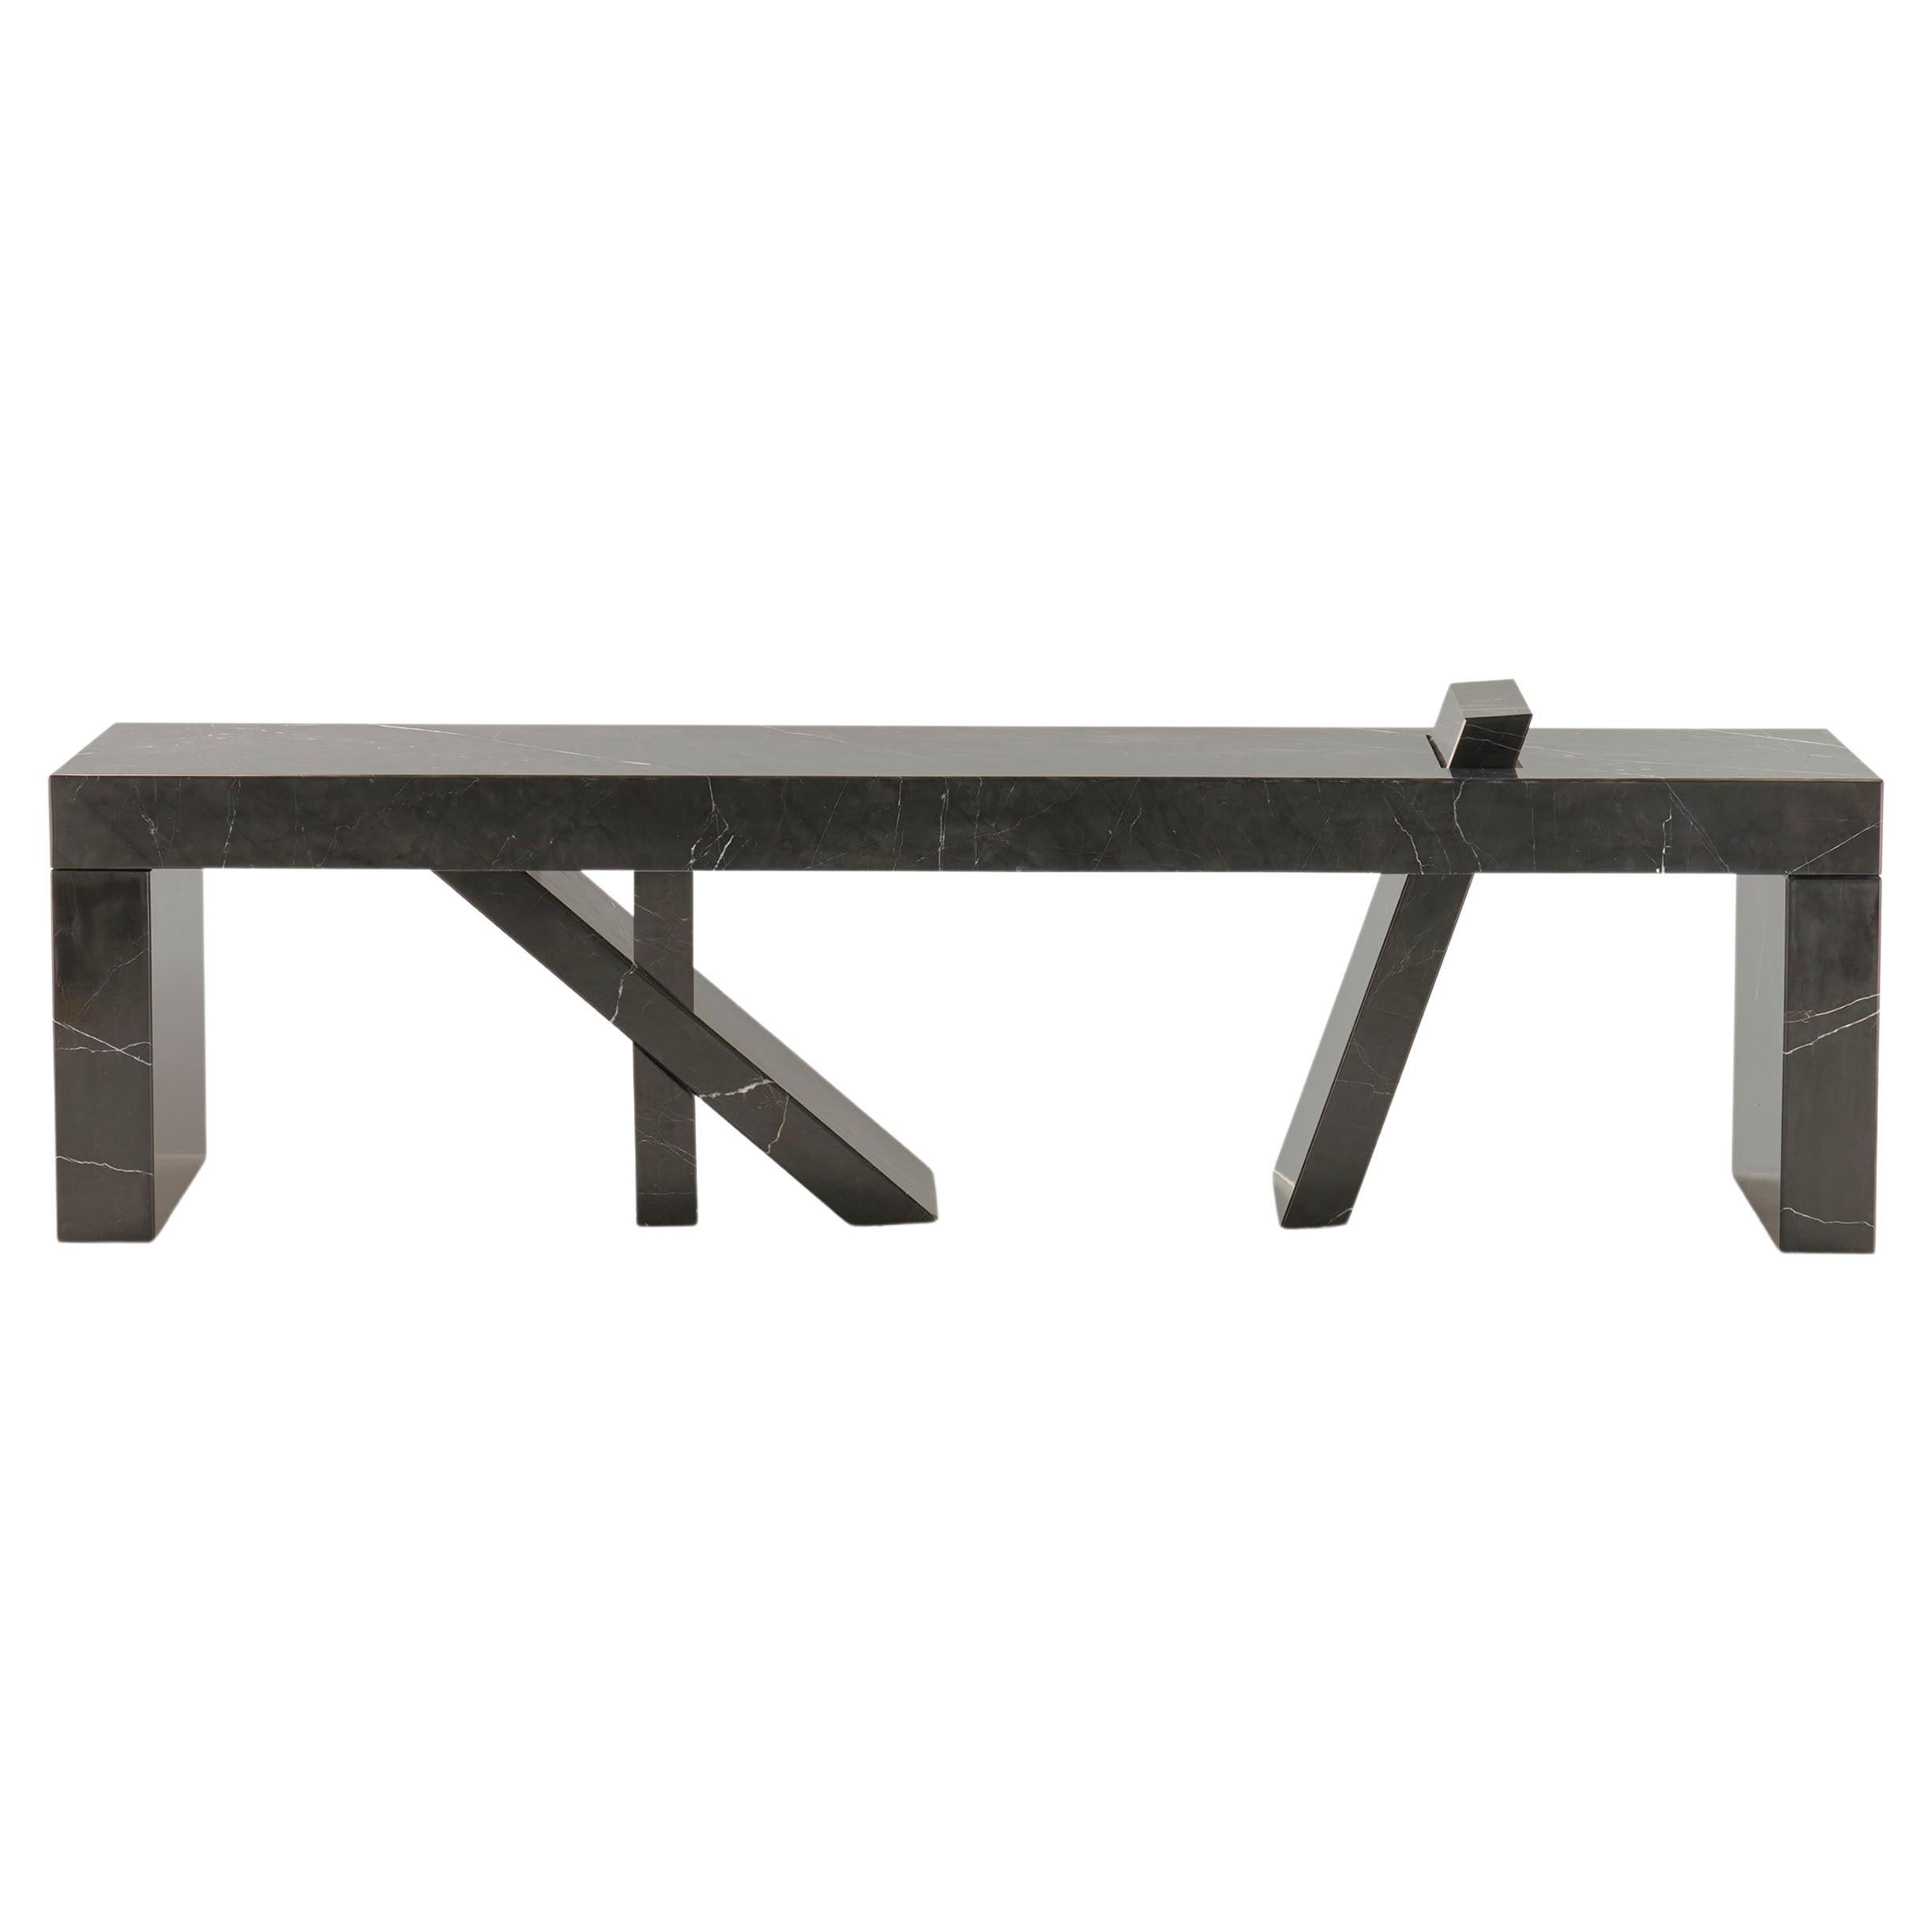 Walking Bench 12ft, solid black marble stone bench for indoor or outdoor use For Sale